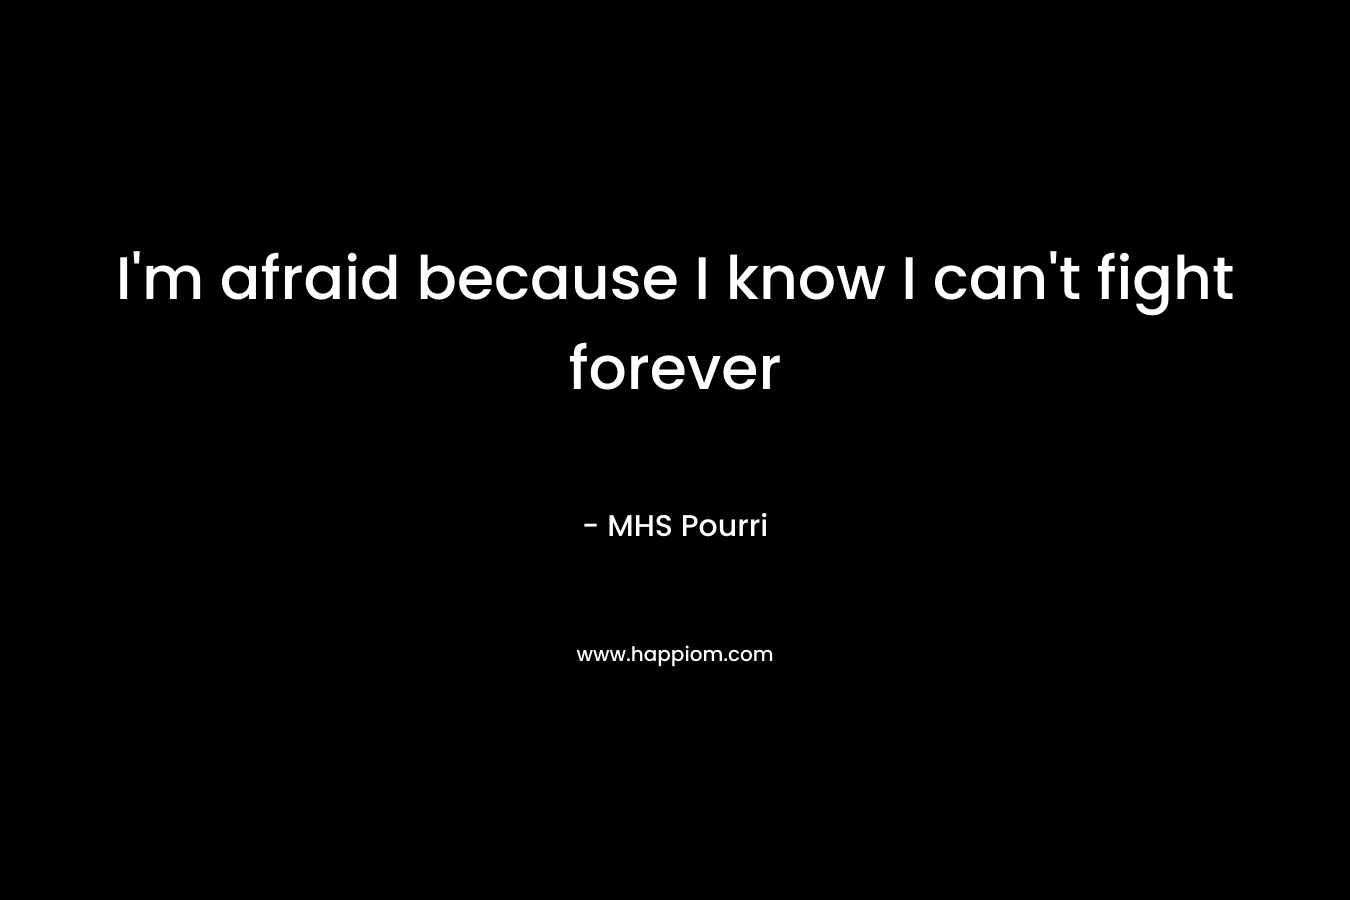 I'm afraid because I know I can't fight forever